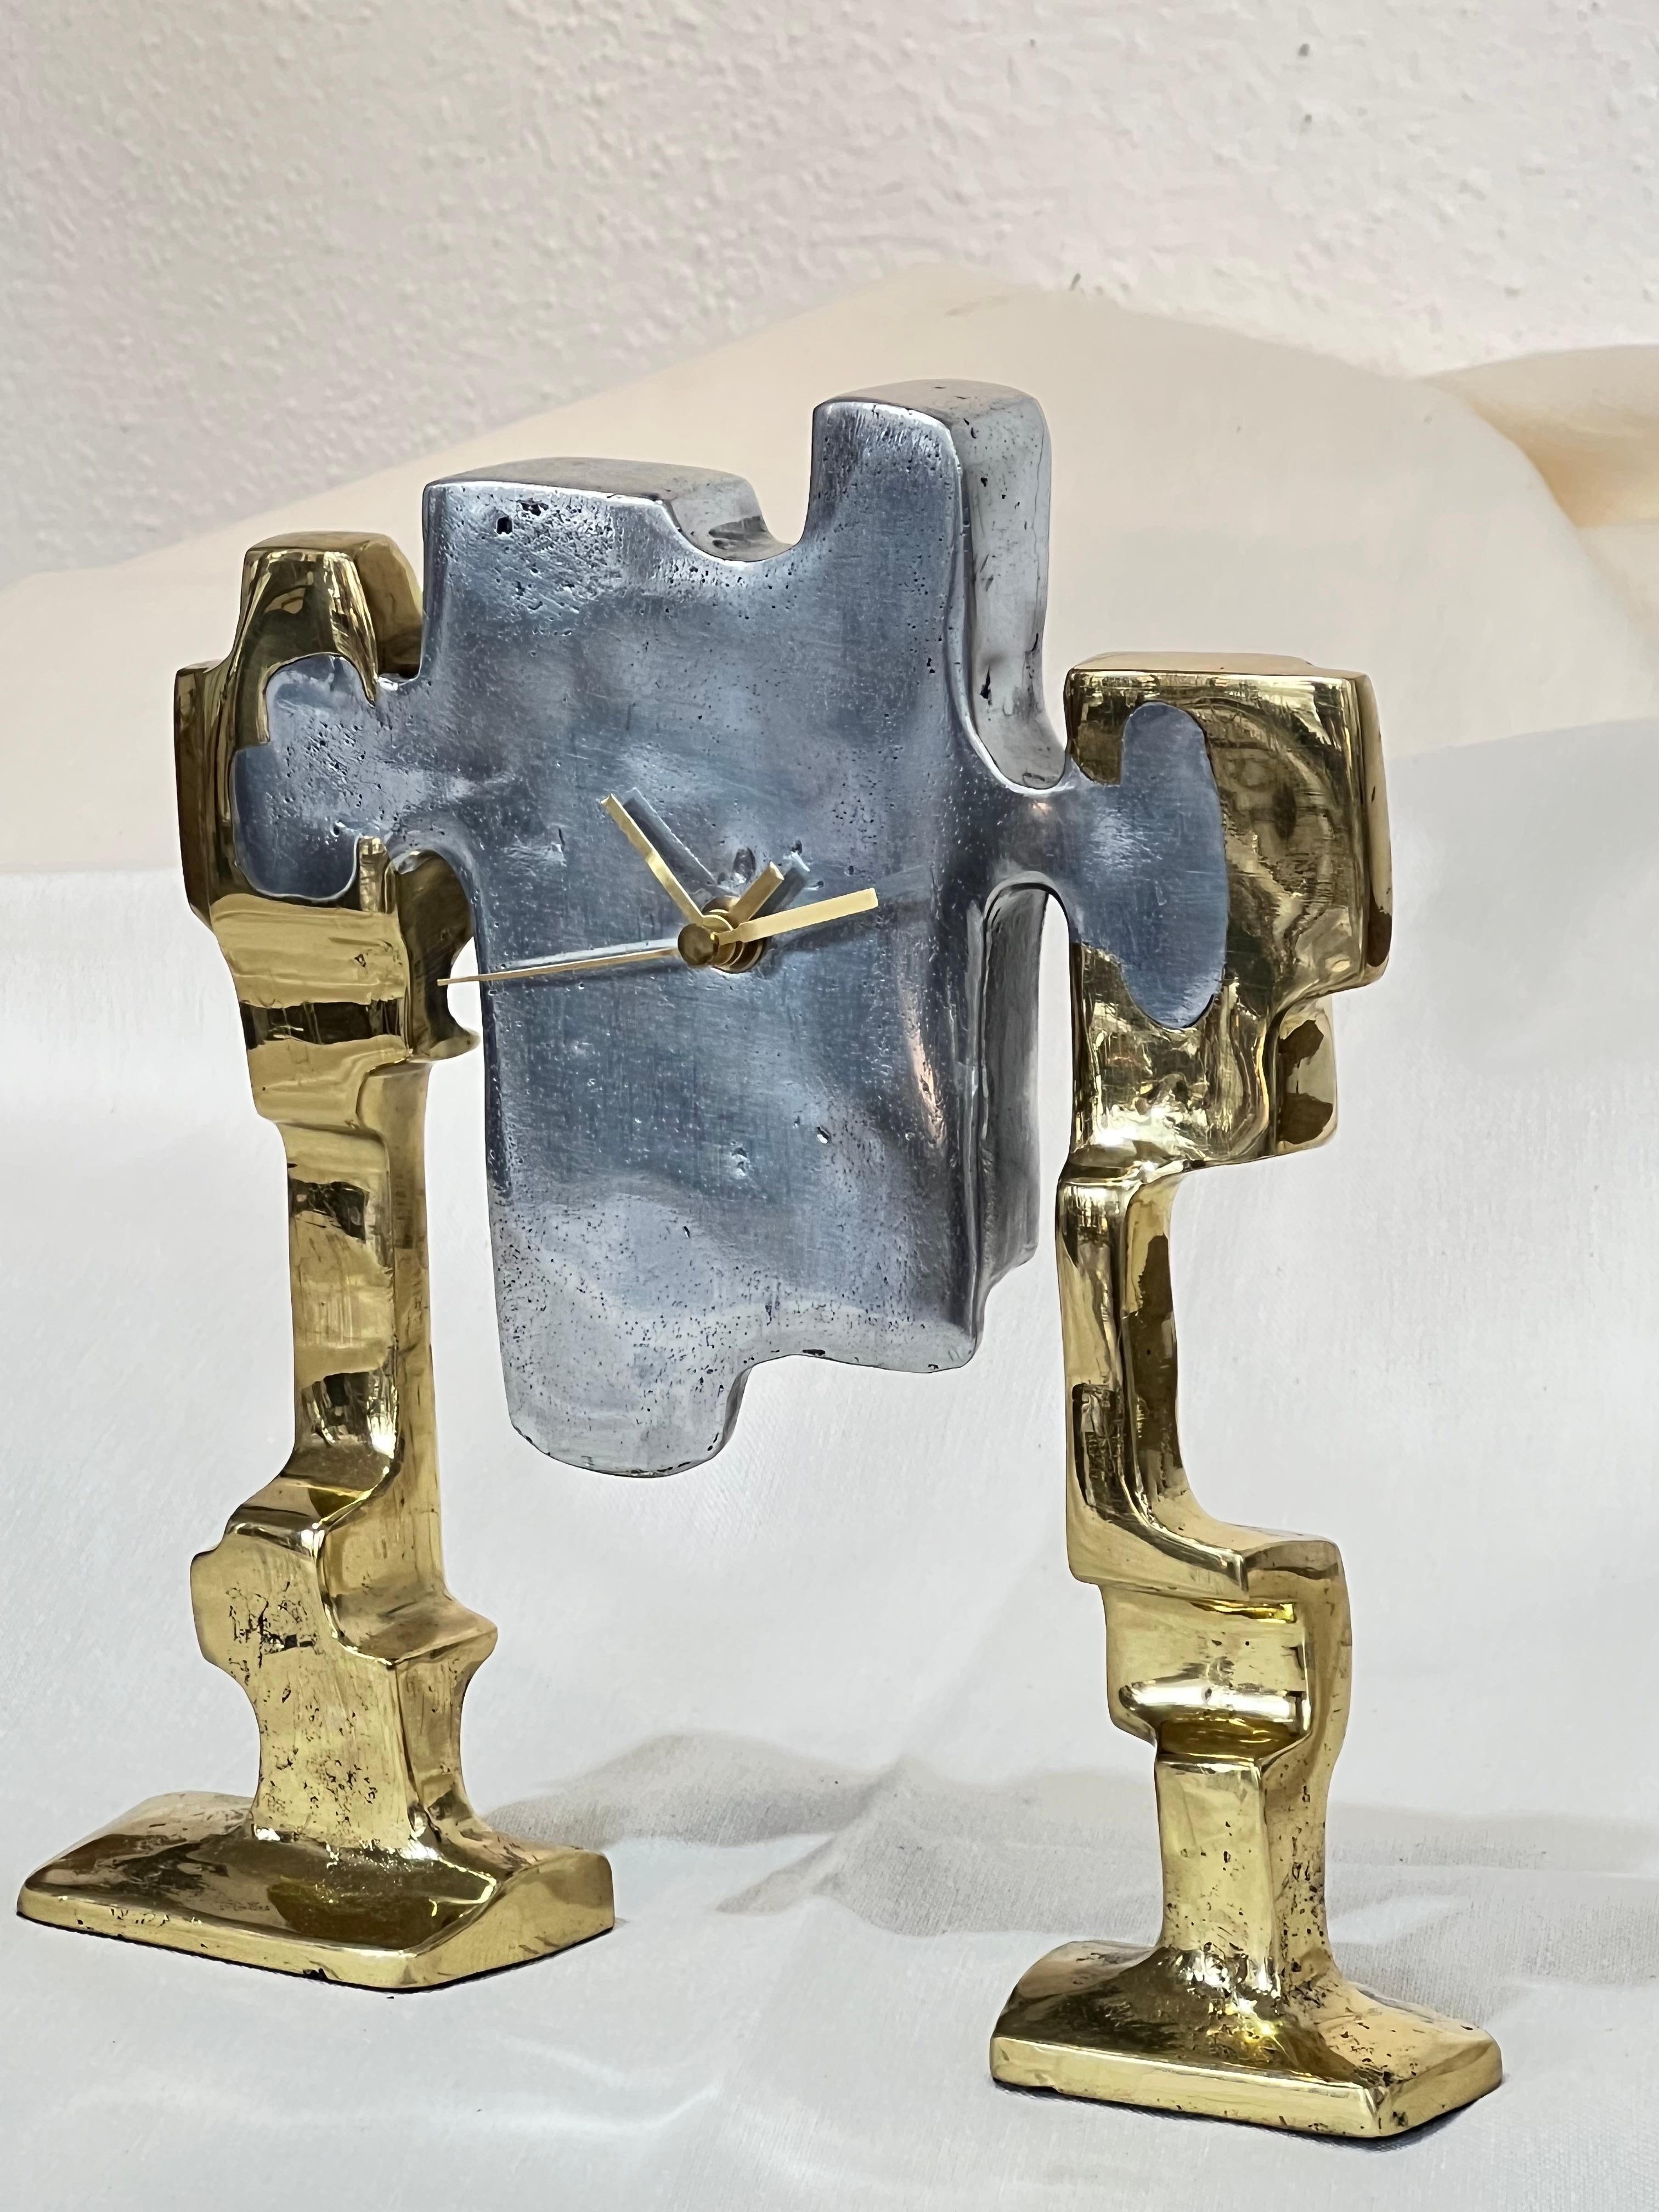 The decorative Table Clock was created by David Marshall, it is made of sand cast aluminum and sand cast brass.
Handmade, mounted and finished in our foundry and workshop in Spain from recycled materials.
Certified authentic by the Artist David